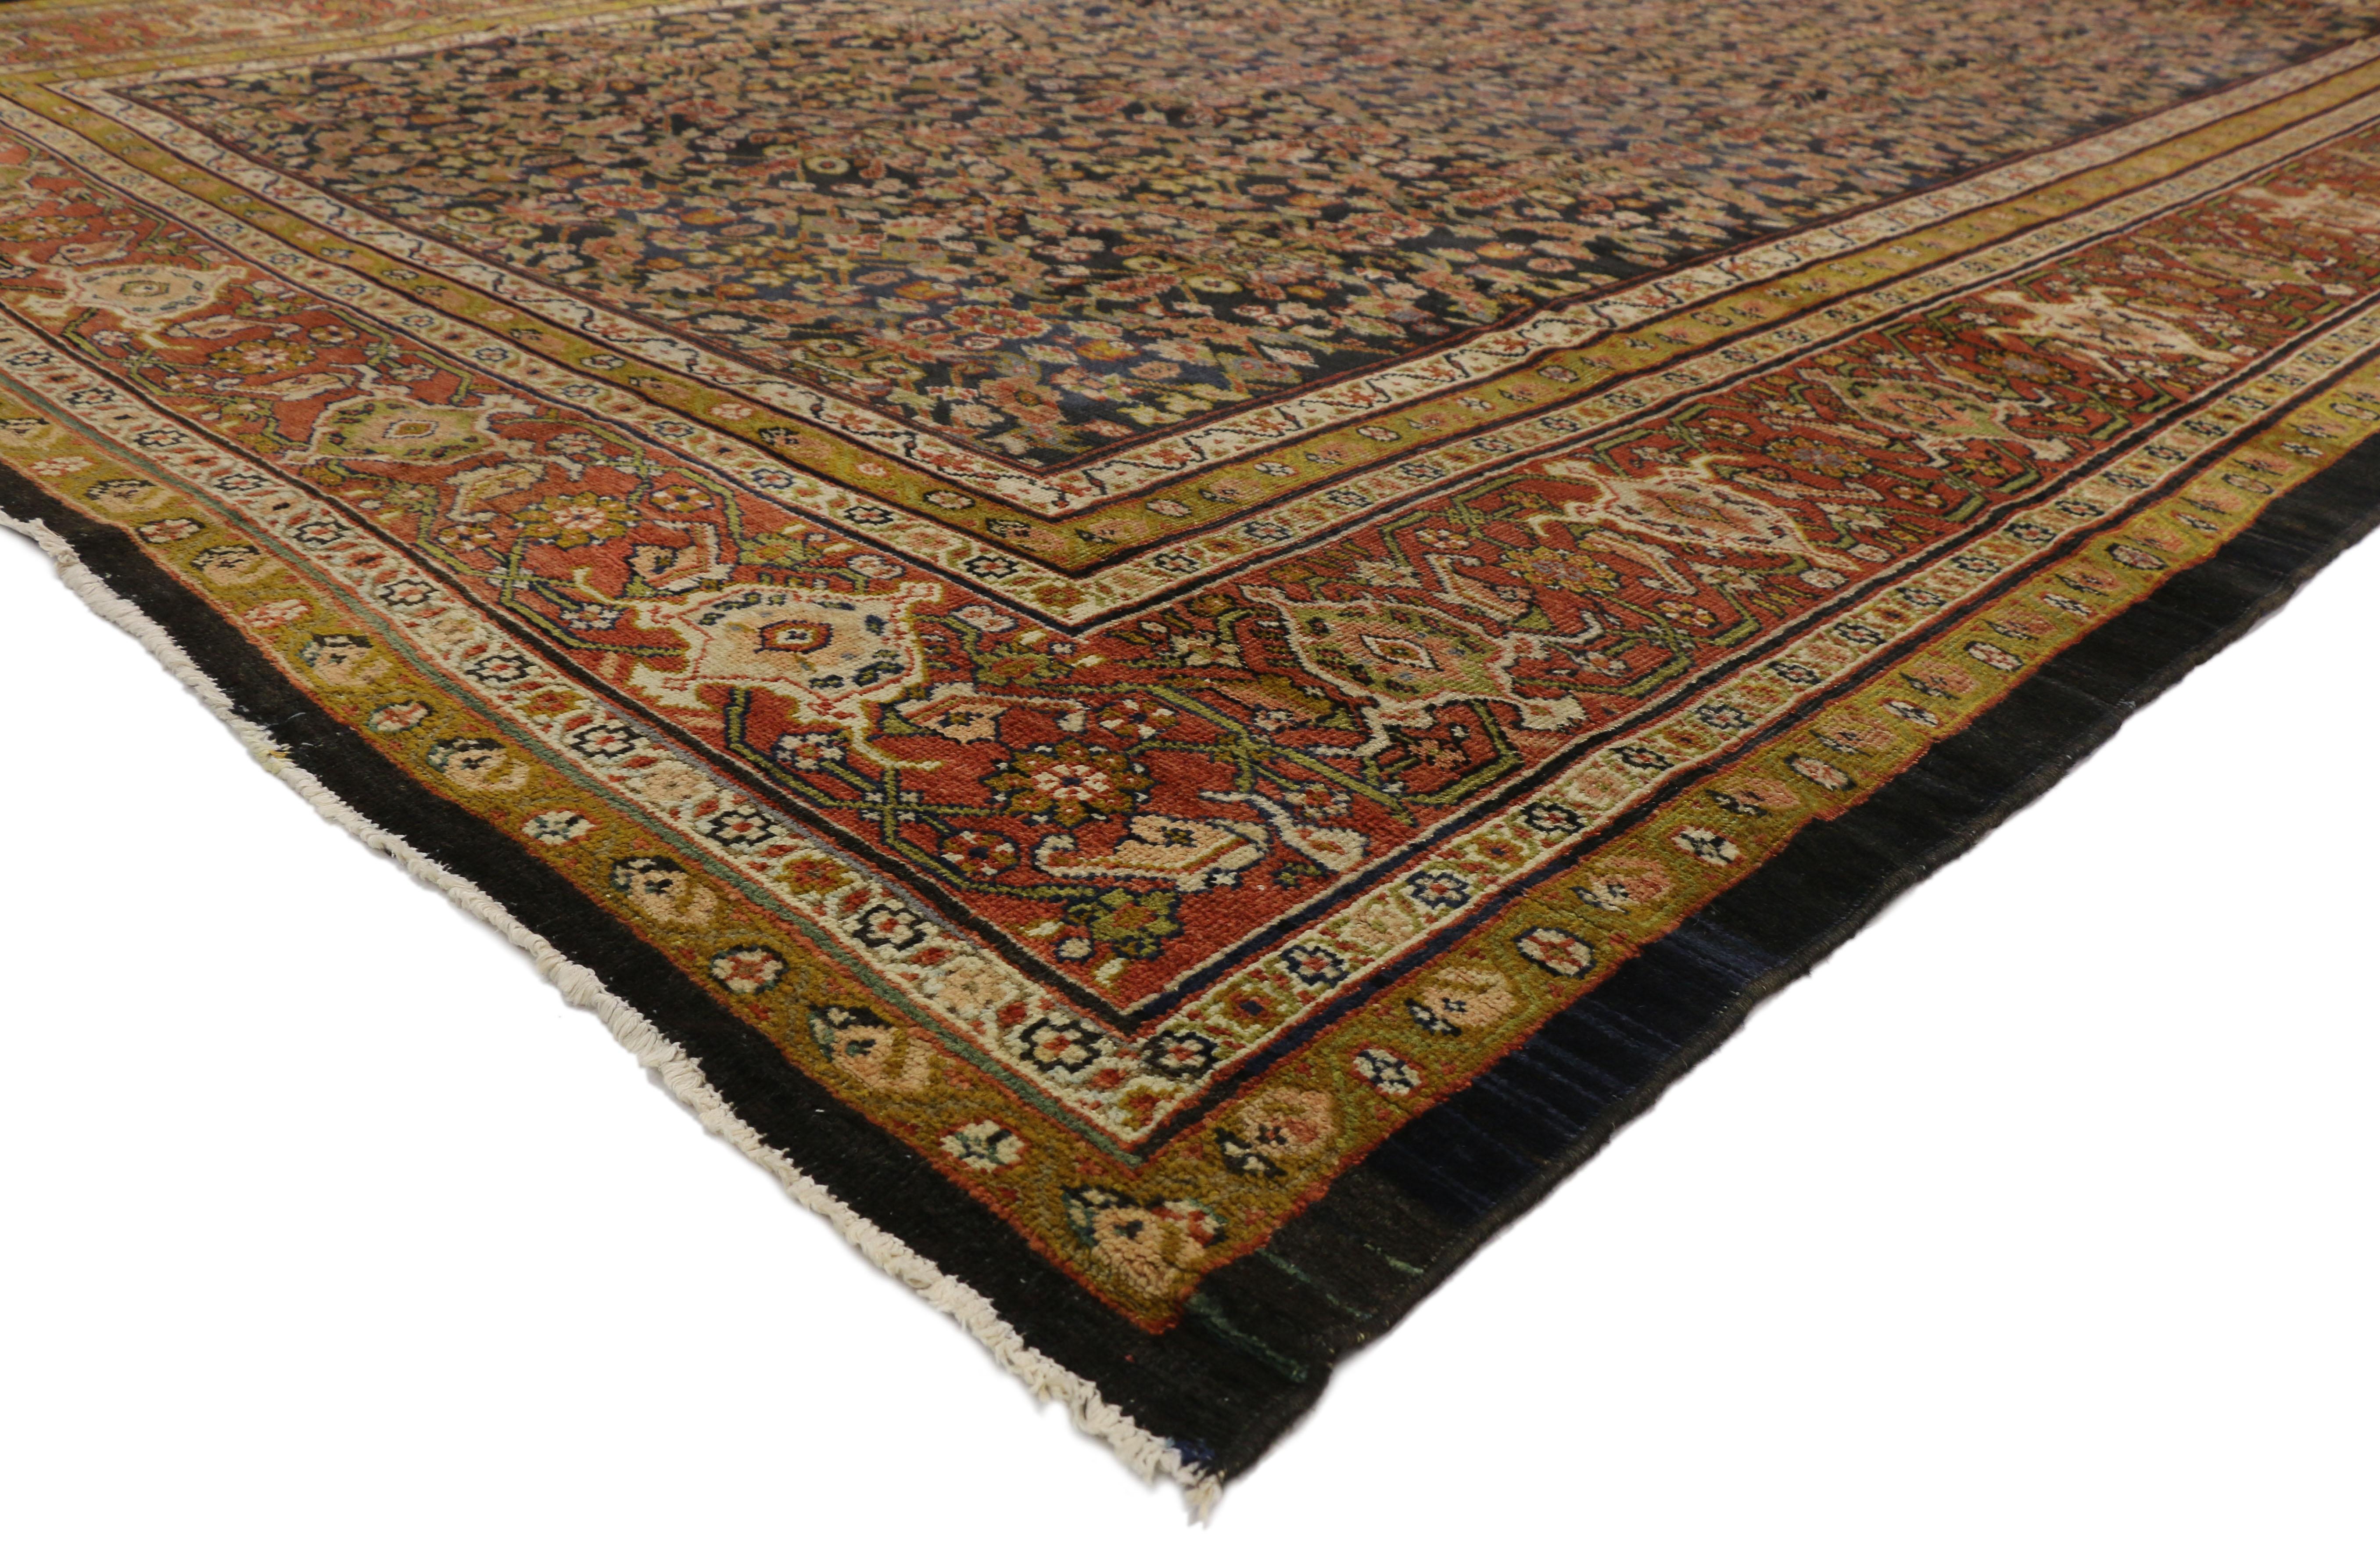 74217 Distressed Antique Persian Sultanabad Palace rug with Industrial Artisan style. This hand knotted wool antique Persian Sultanabad palace size rug features a lively all-over floral lattice pattern composed of Mina Khani design and Guli Henna